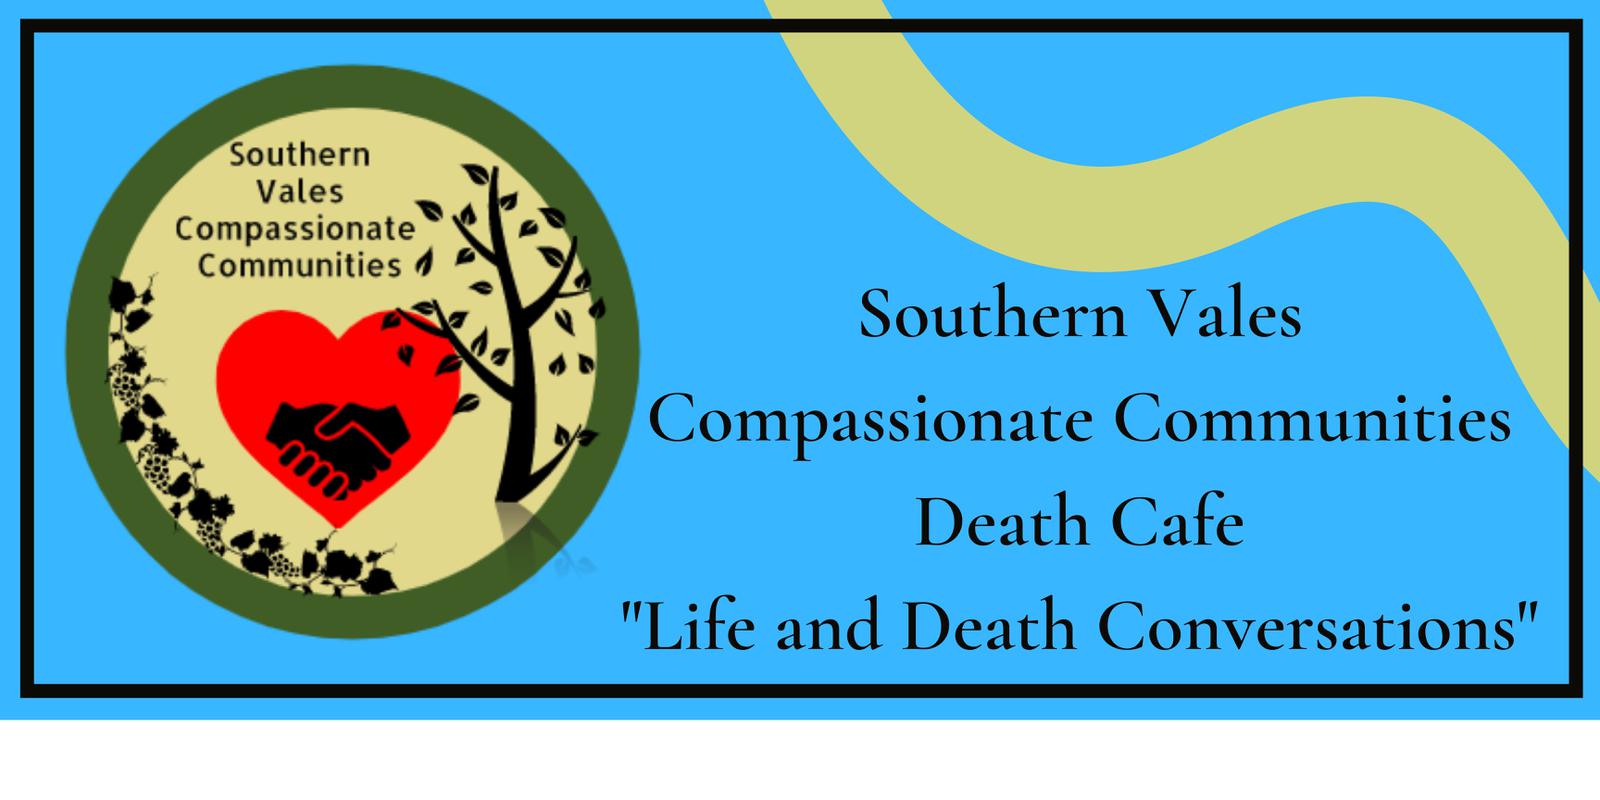 Death Cafe Compassionate Communities Southern Vales 